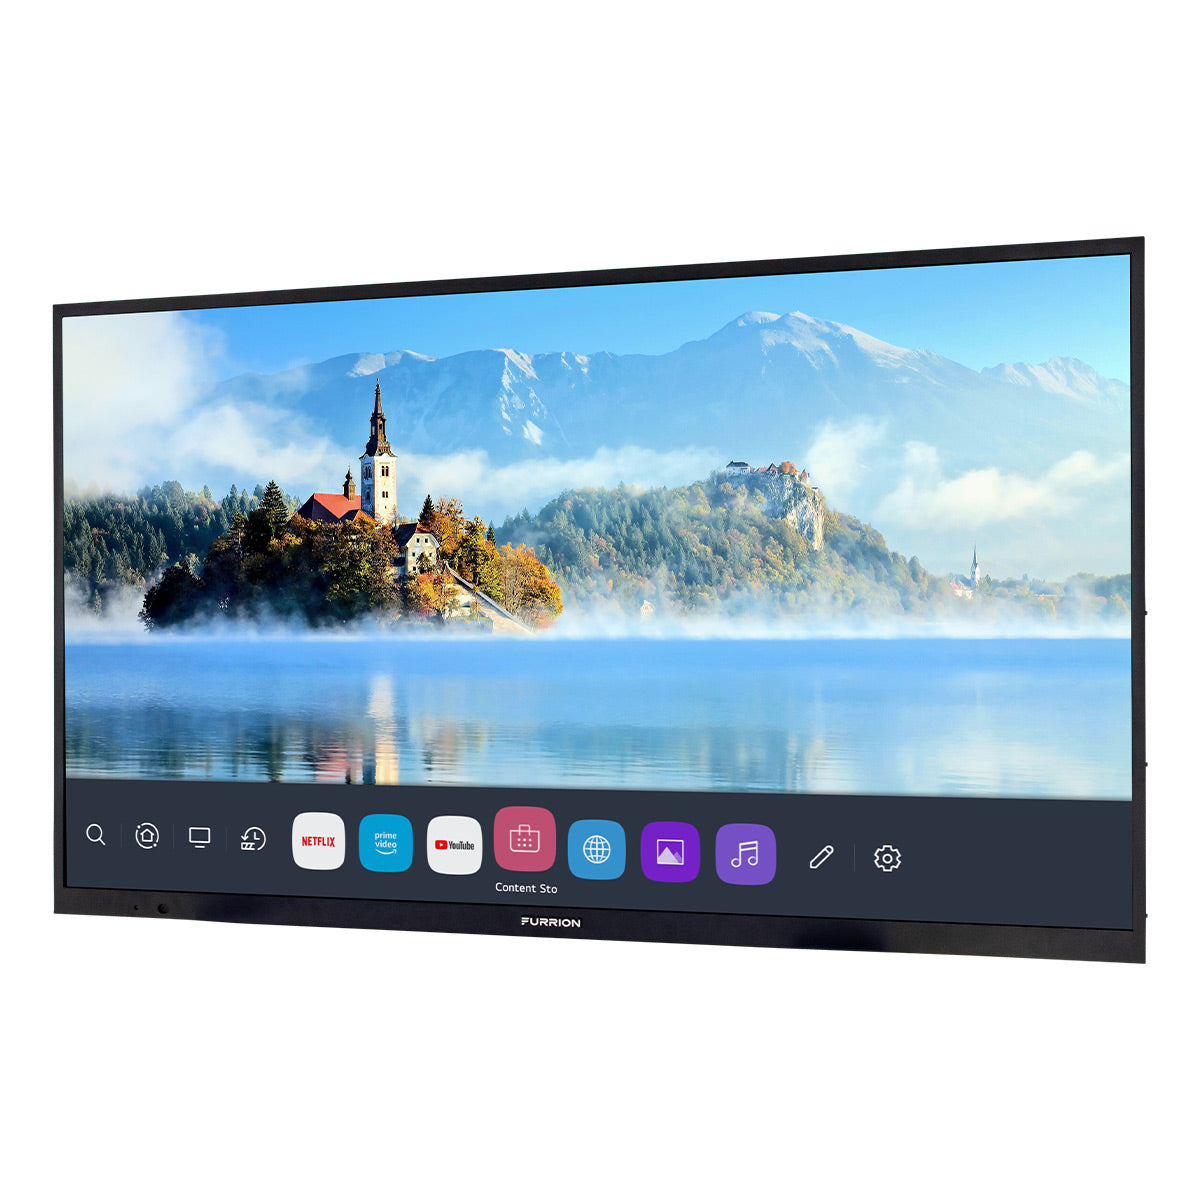 Furrion Aurora 75" Partial Sun Smart 4K Ultra-High Definition LED Outdoor TV with Weatherproof Protection